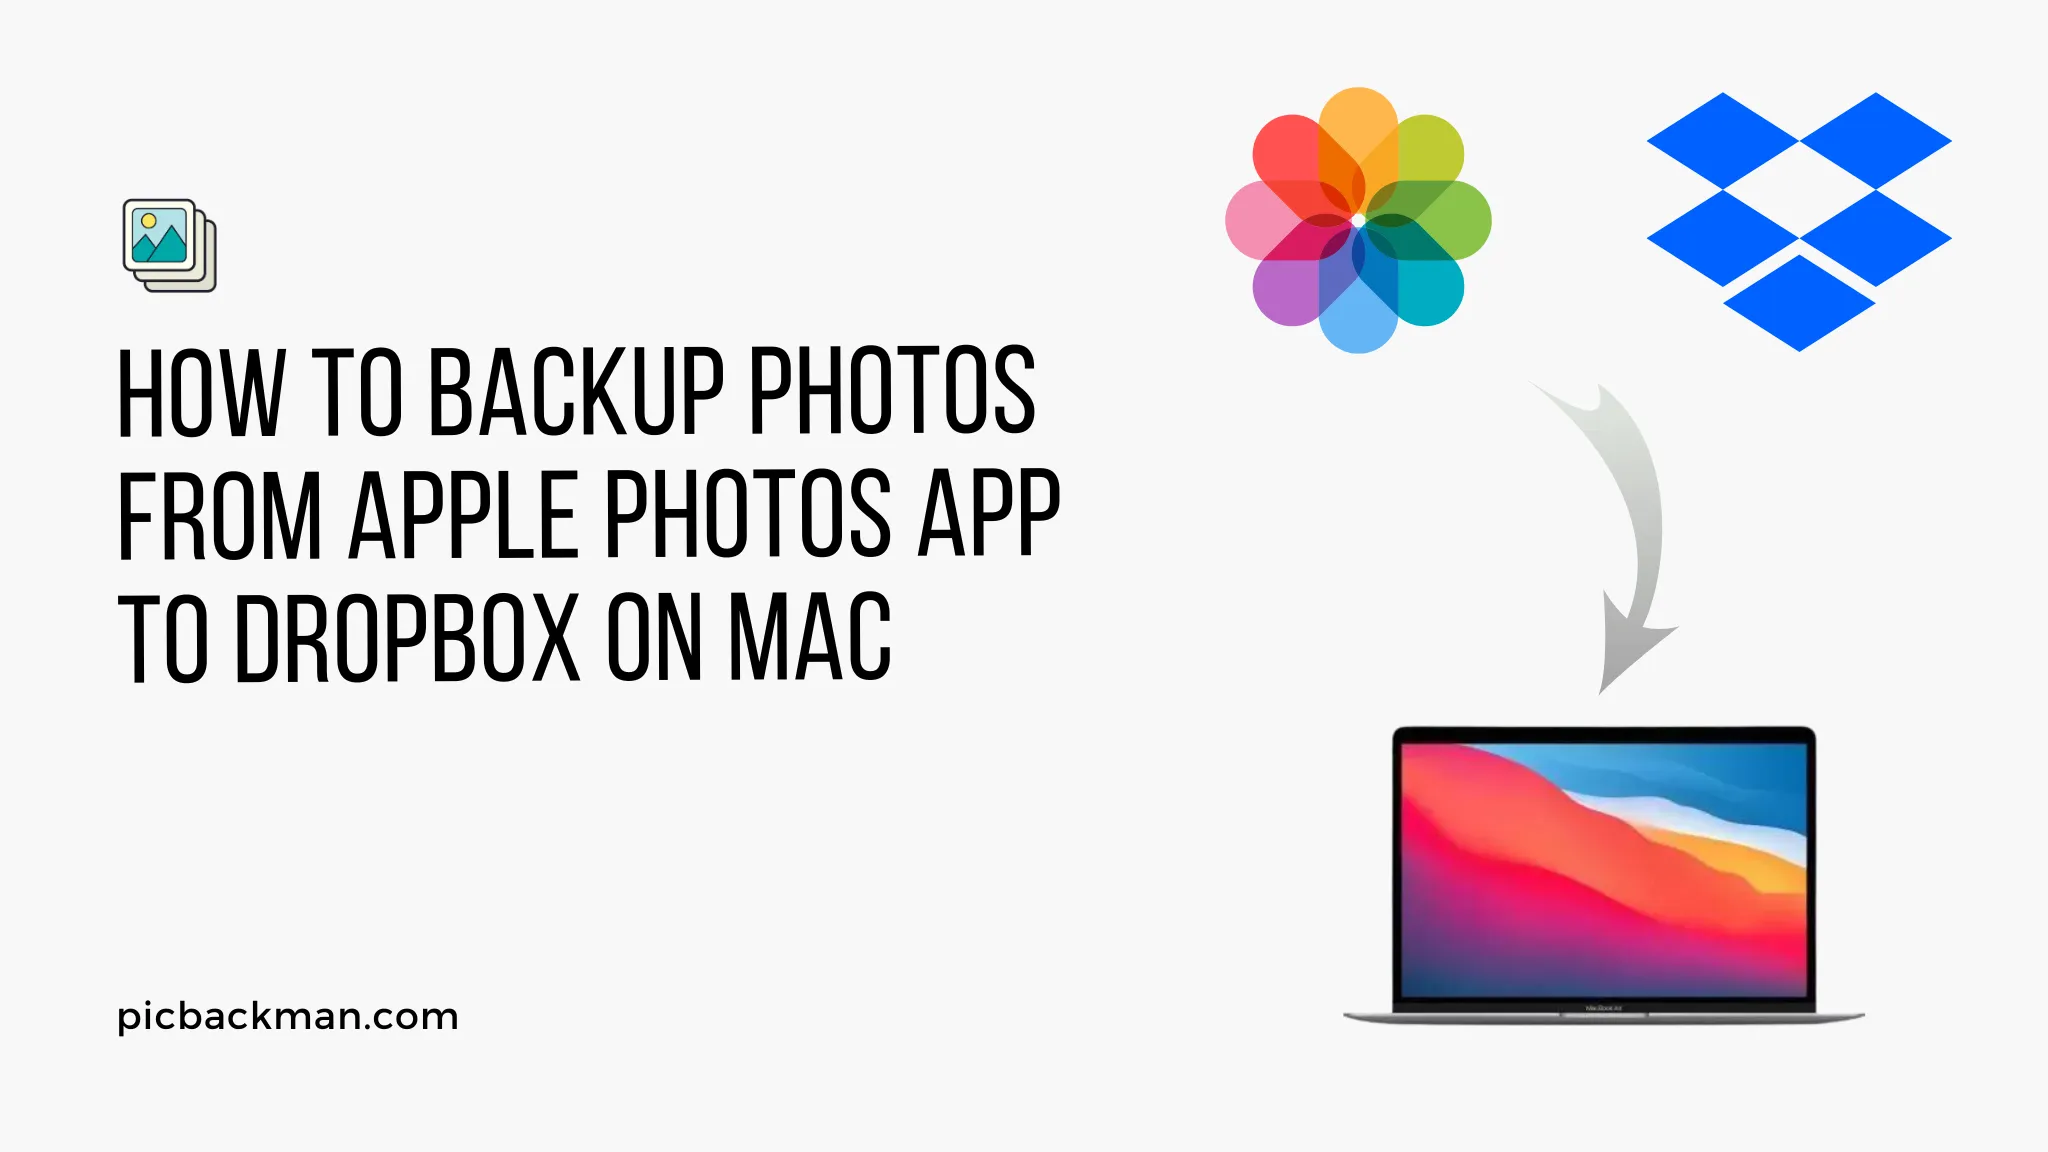 How to Backup Photos from Apple Photos App to Dropbox on Mac?